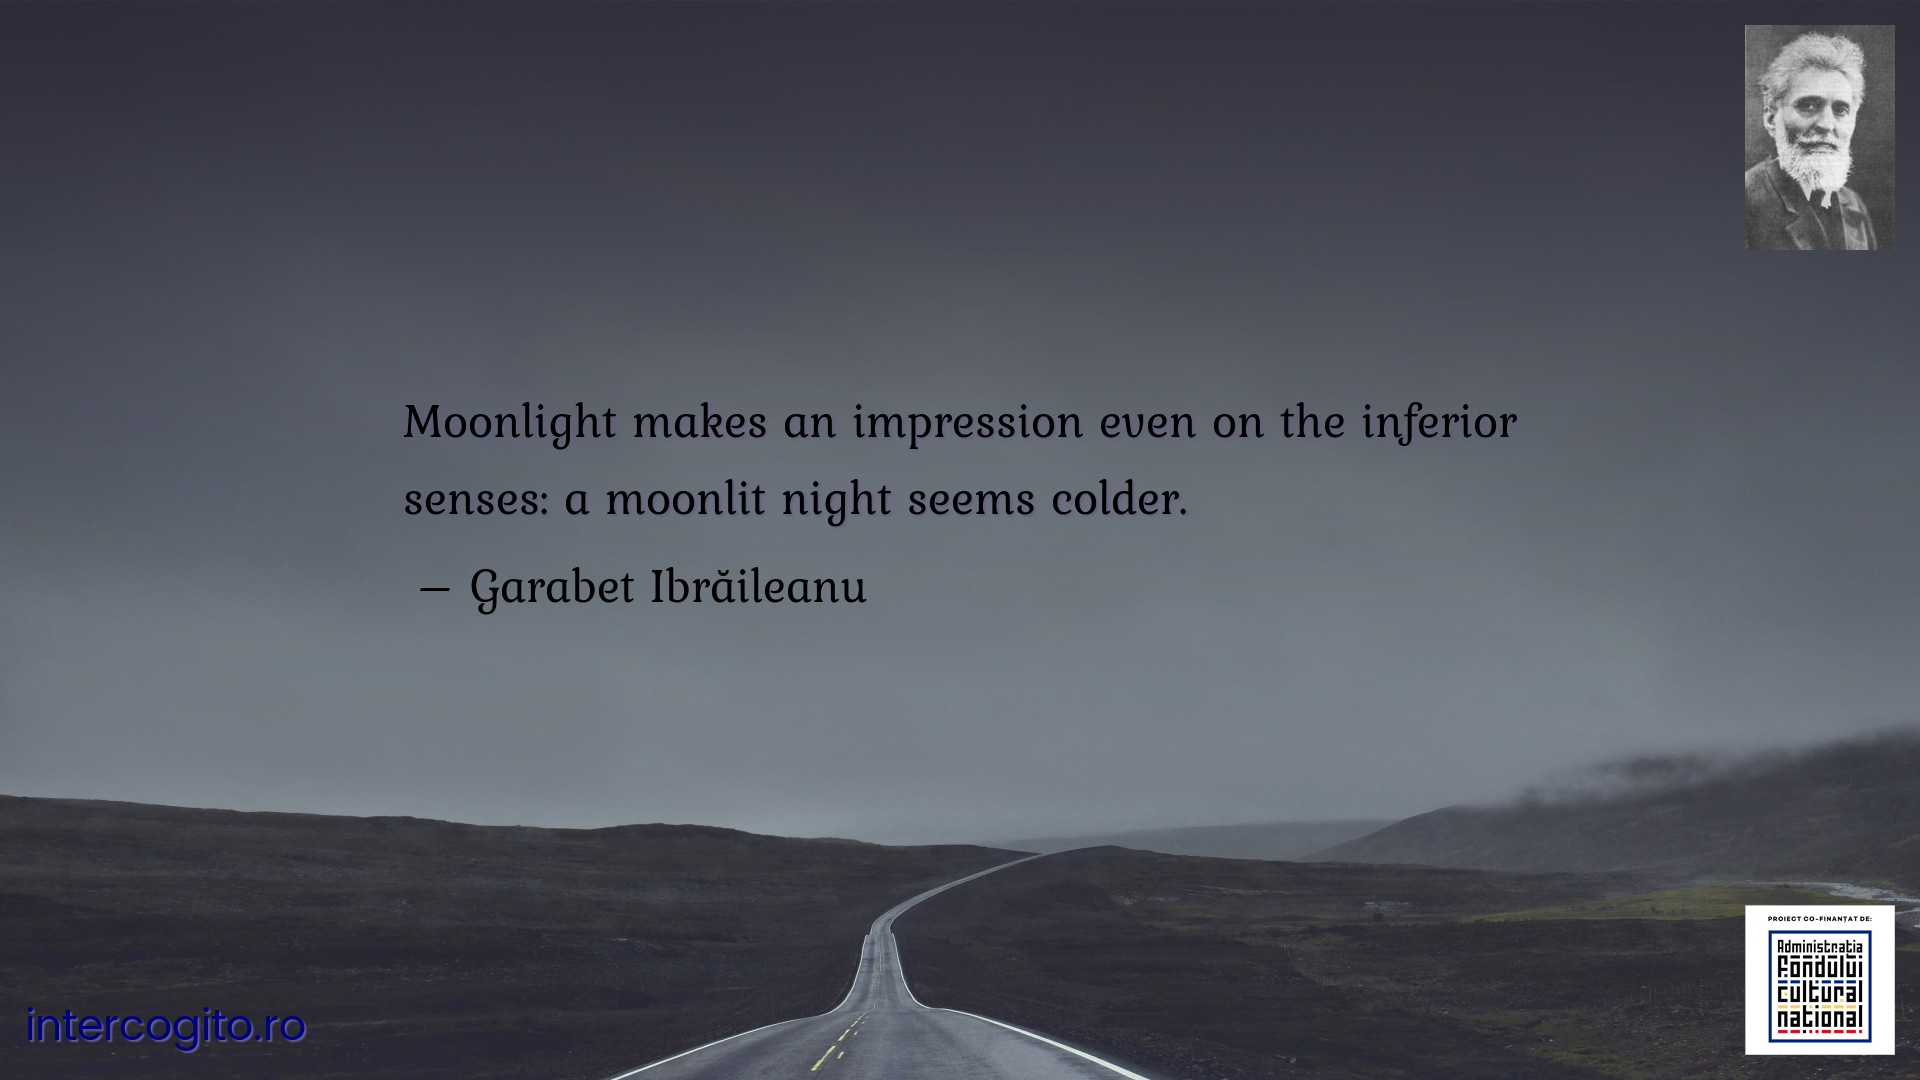 Moonlight makes an impression even on the inferior senses: a moonlit night seems colder.